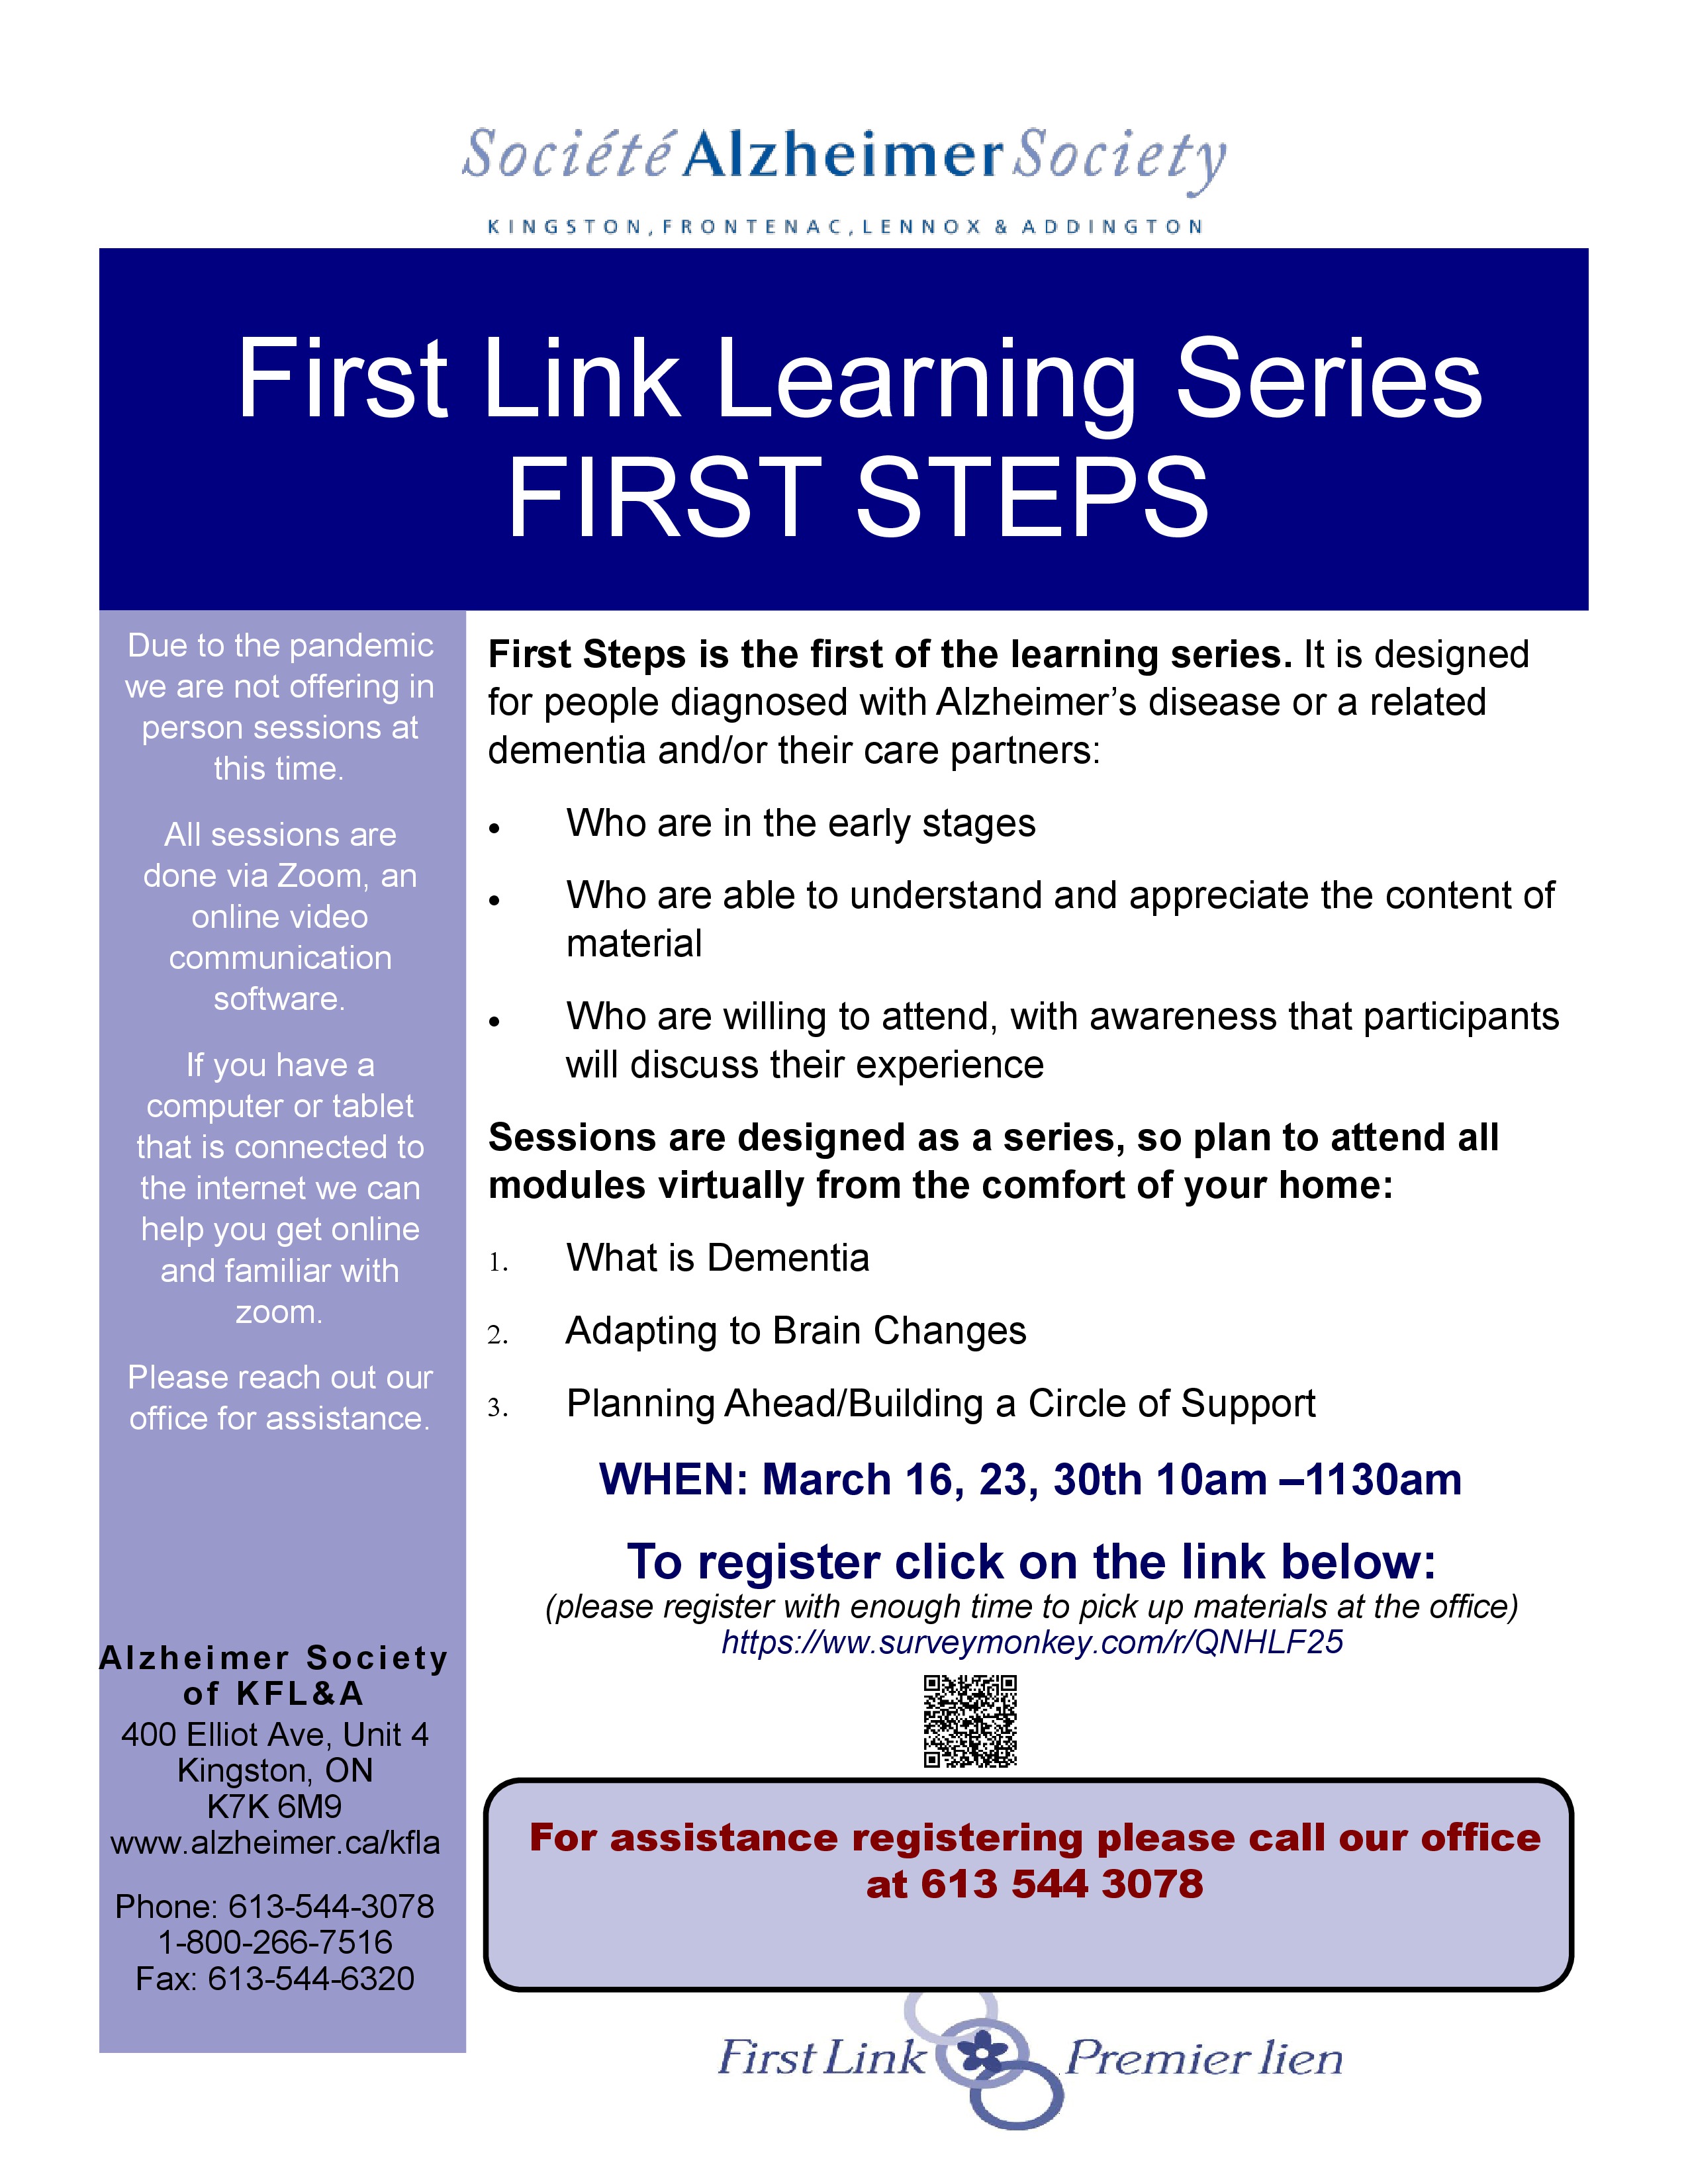 An Information learning series about First Steps after receiving a Dementia Diagnosis.